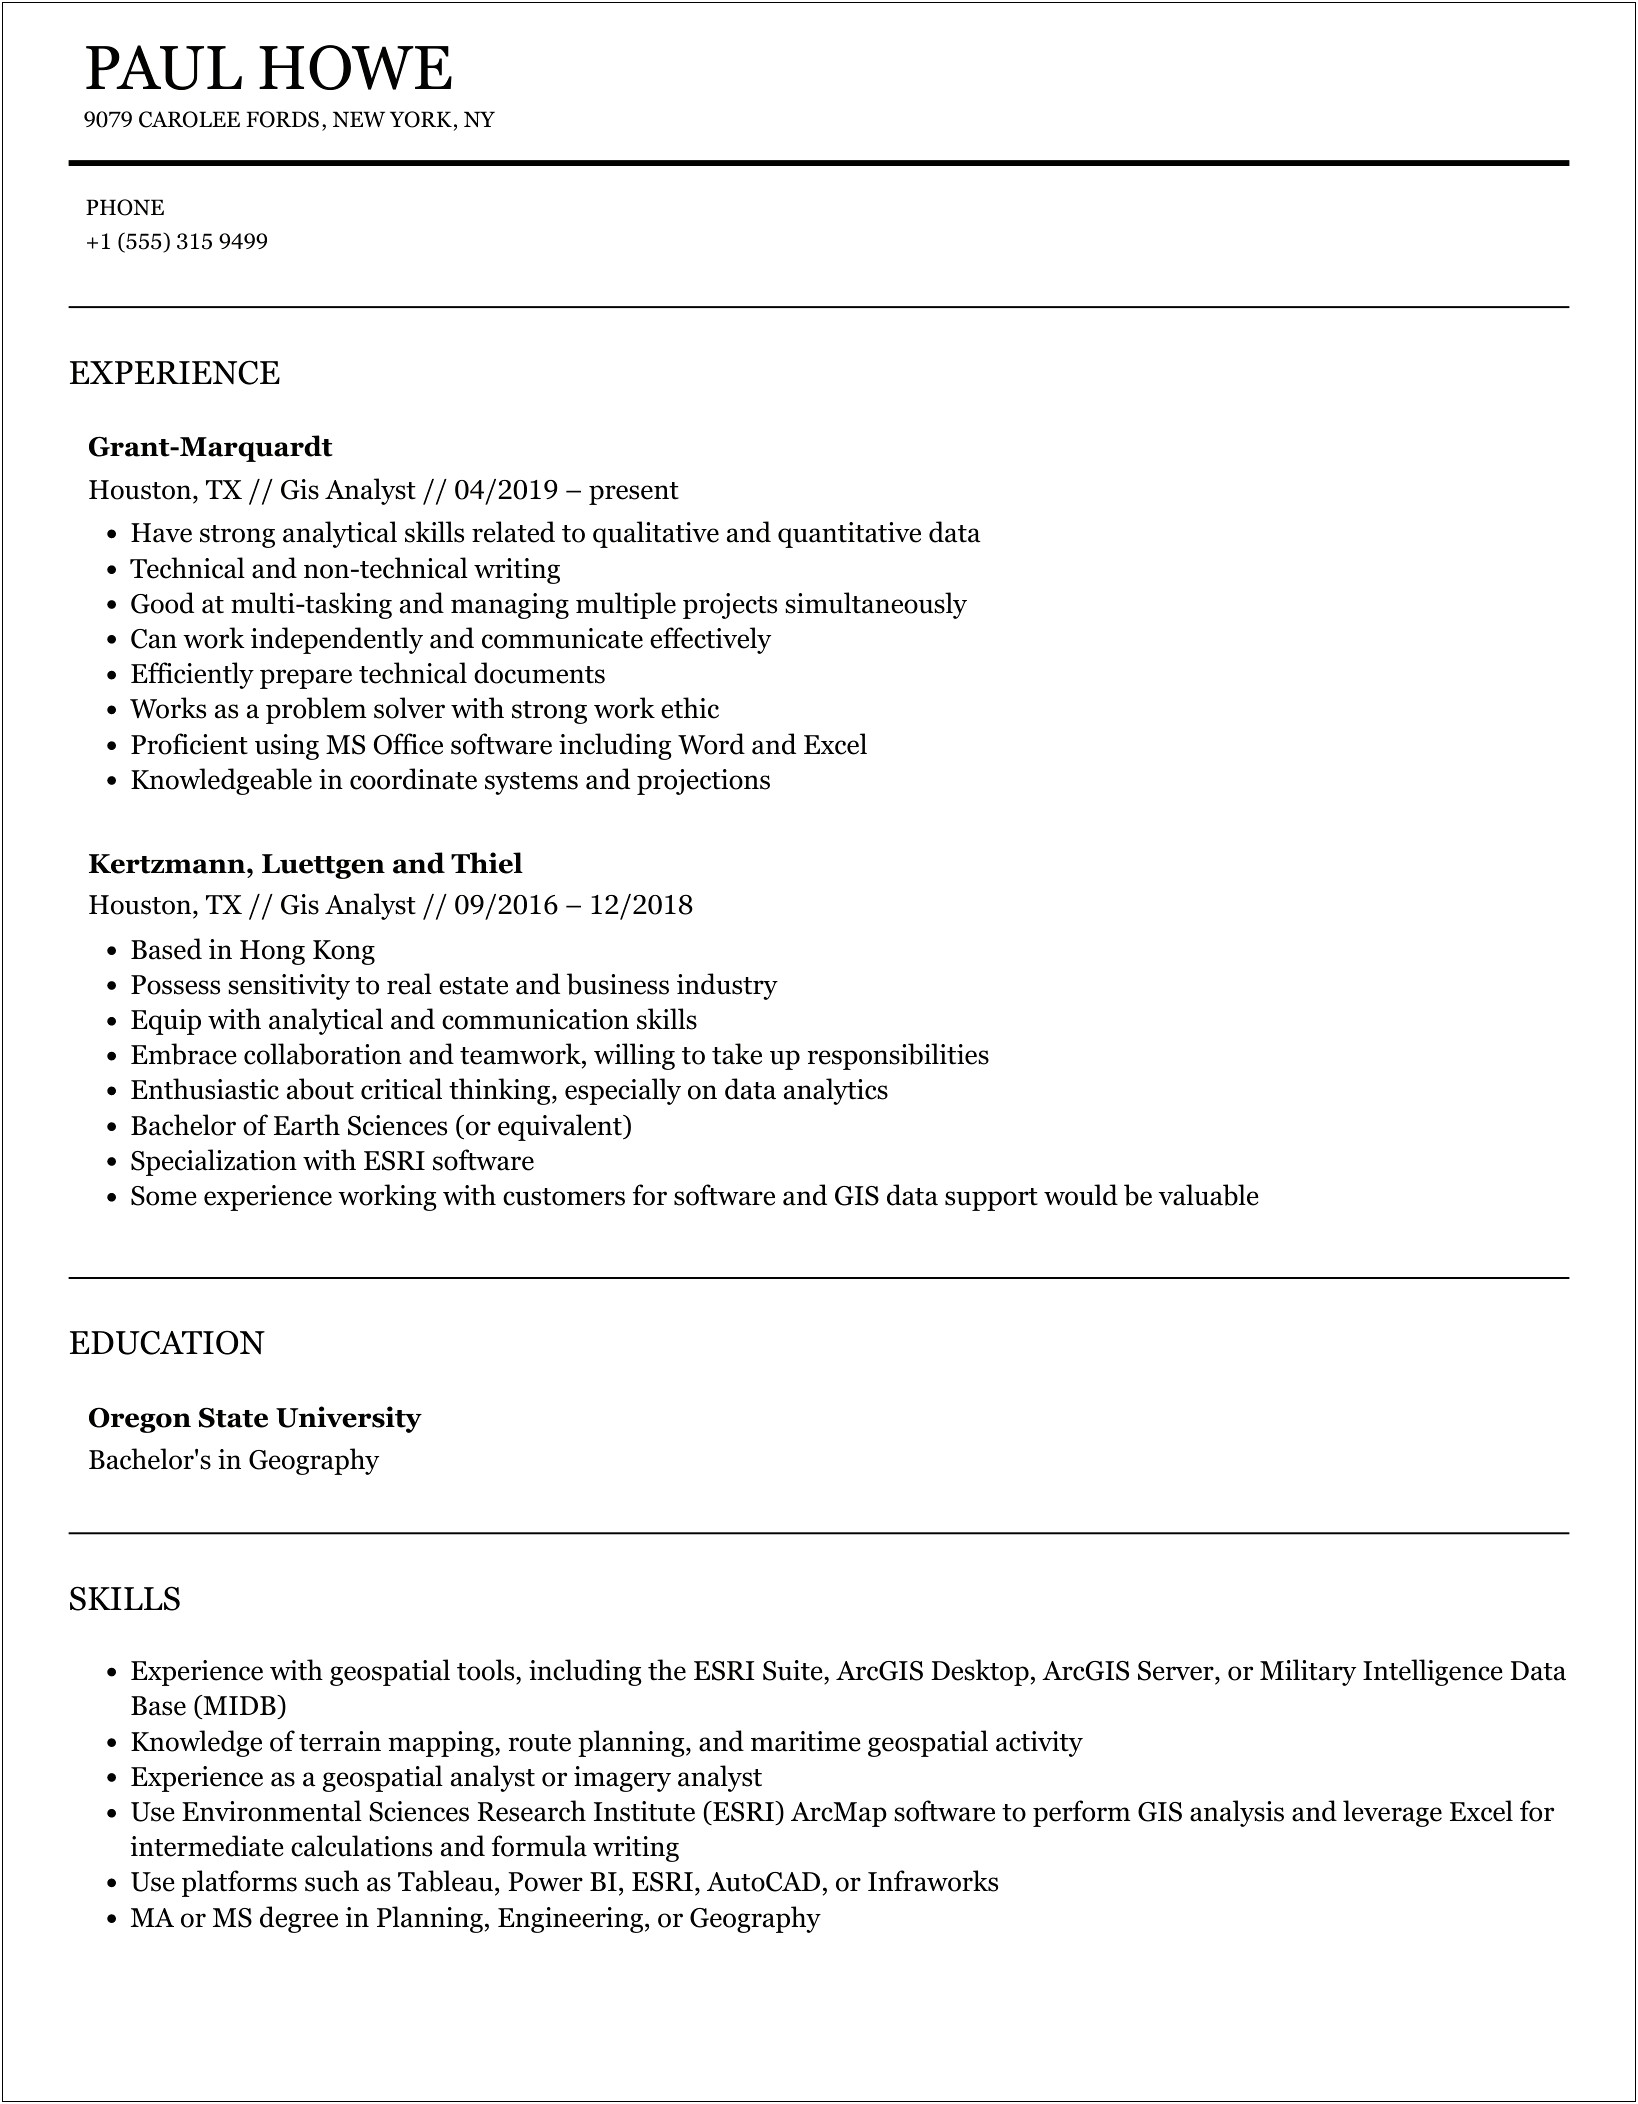 Listing Gis As A Skill On Resume